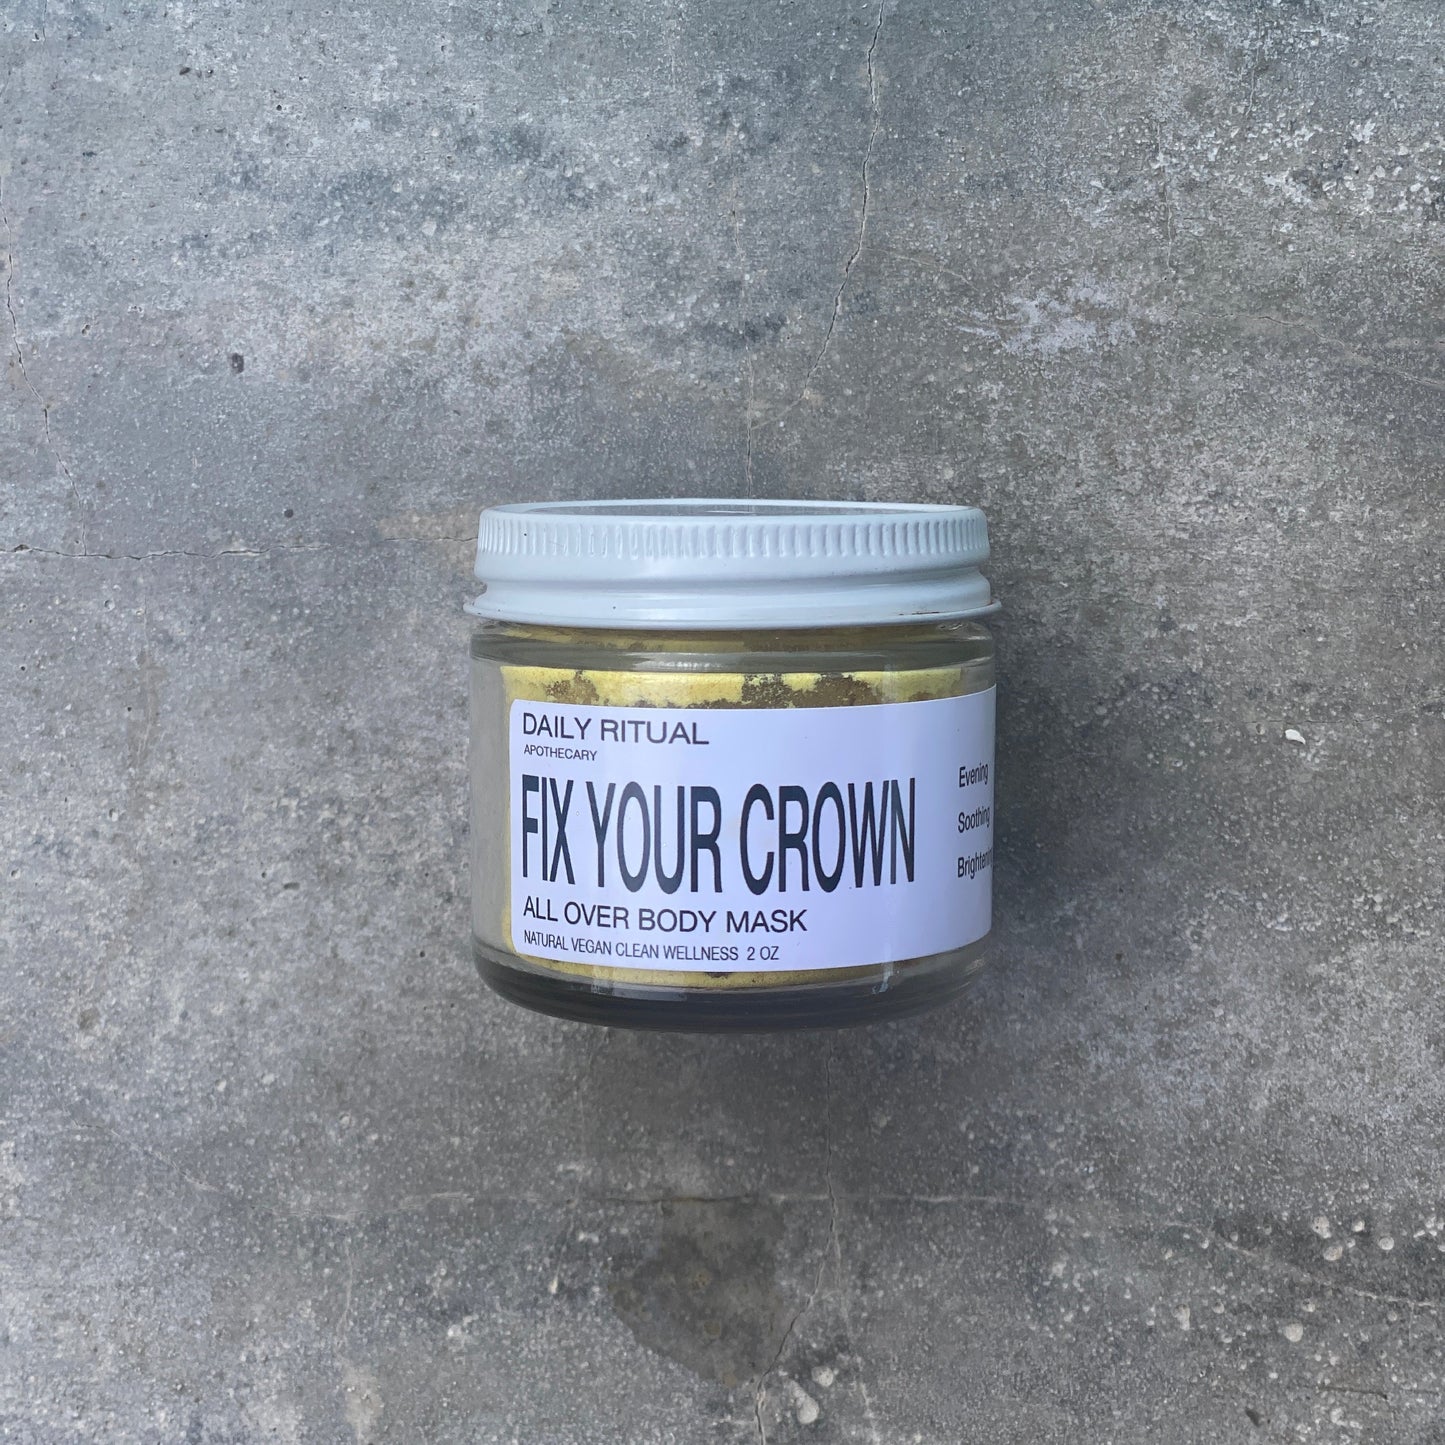 Fix Your Crown - Glow Mask - Daily Ritual Apothecary